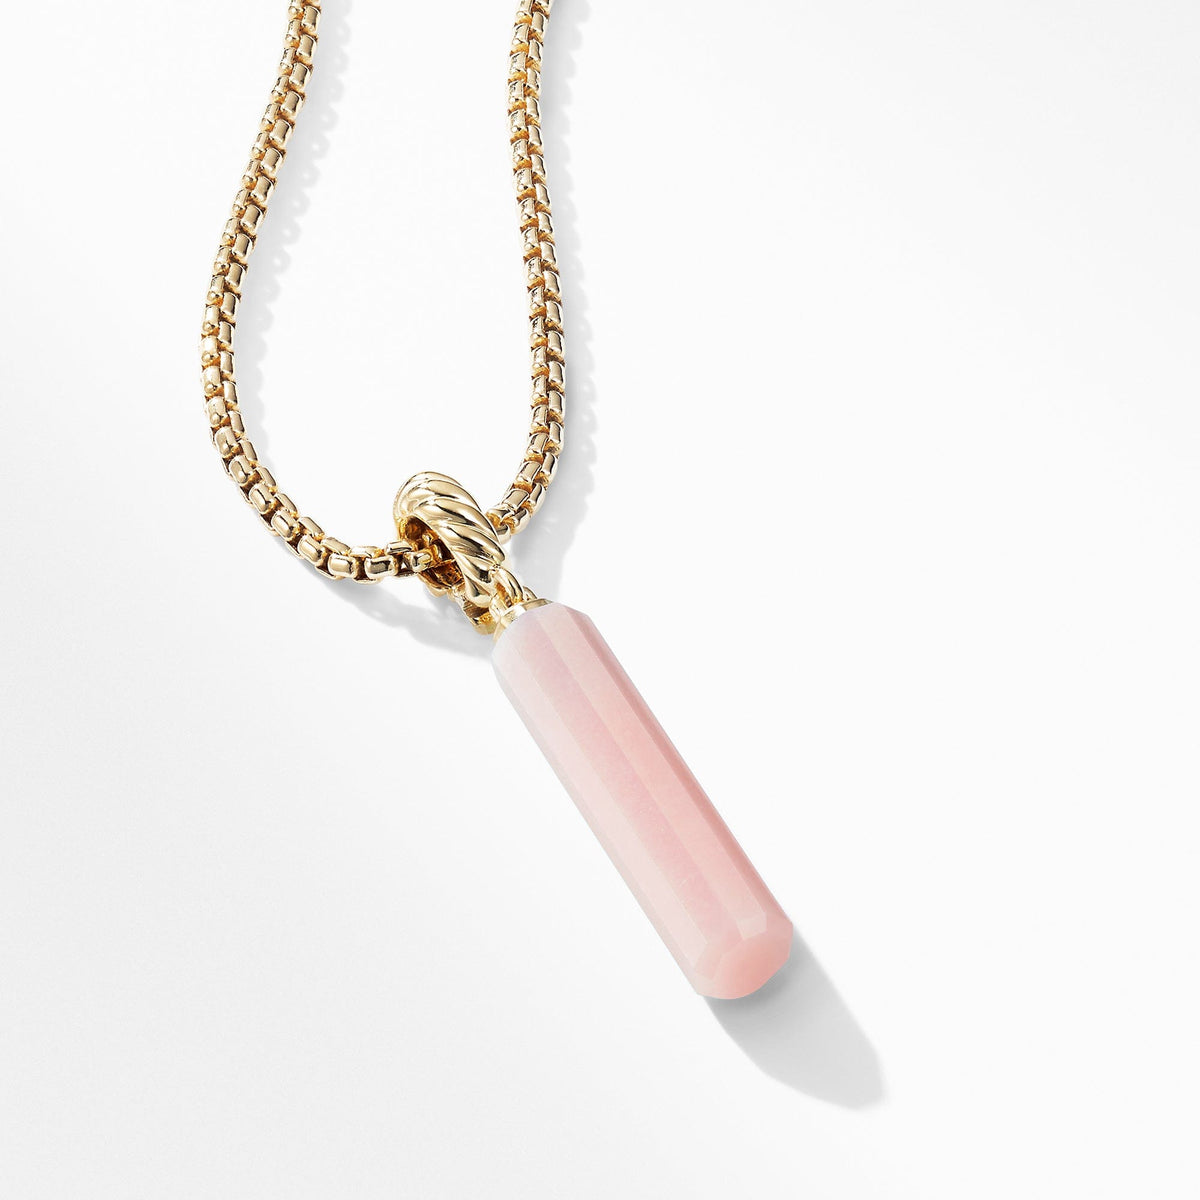 Barrel Charm in Pink Opal with 18K Gold